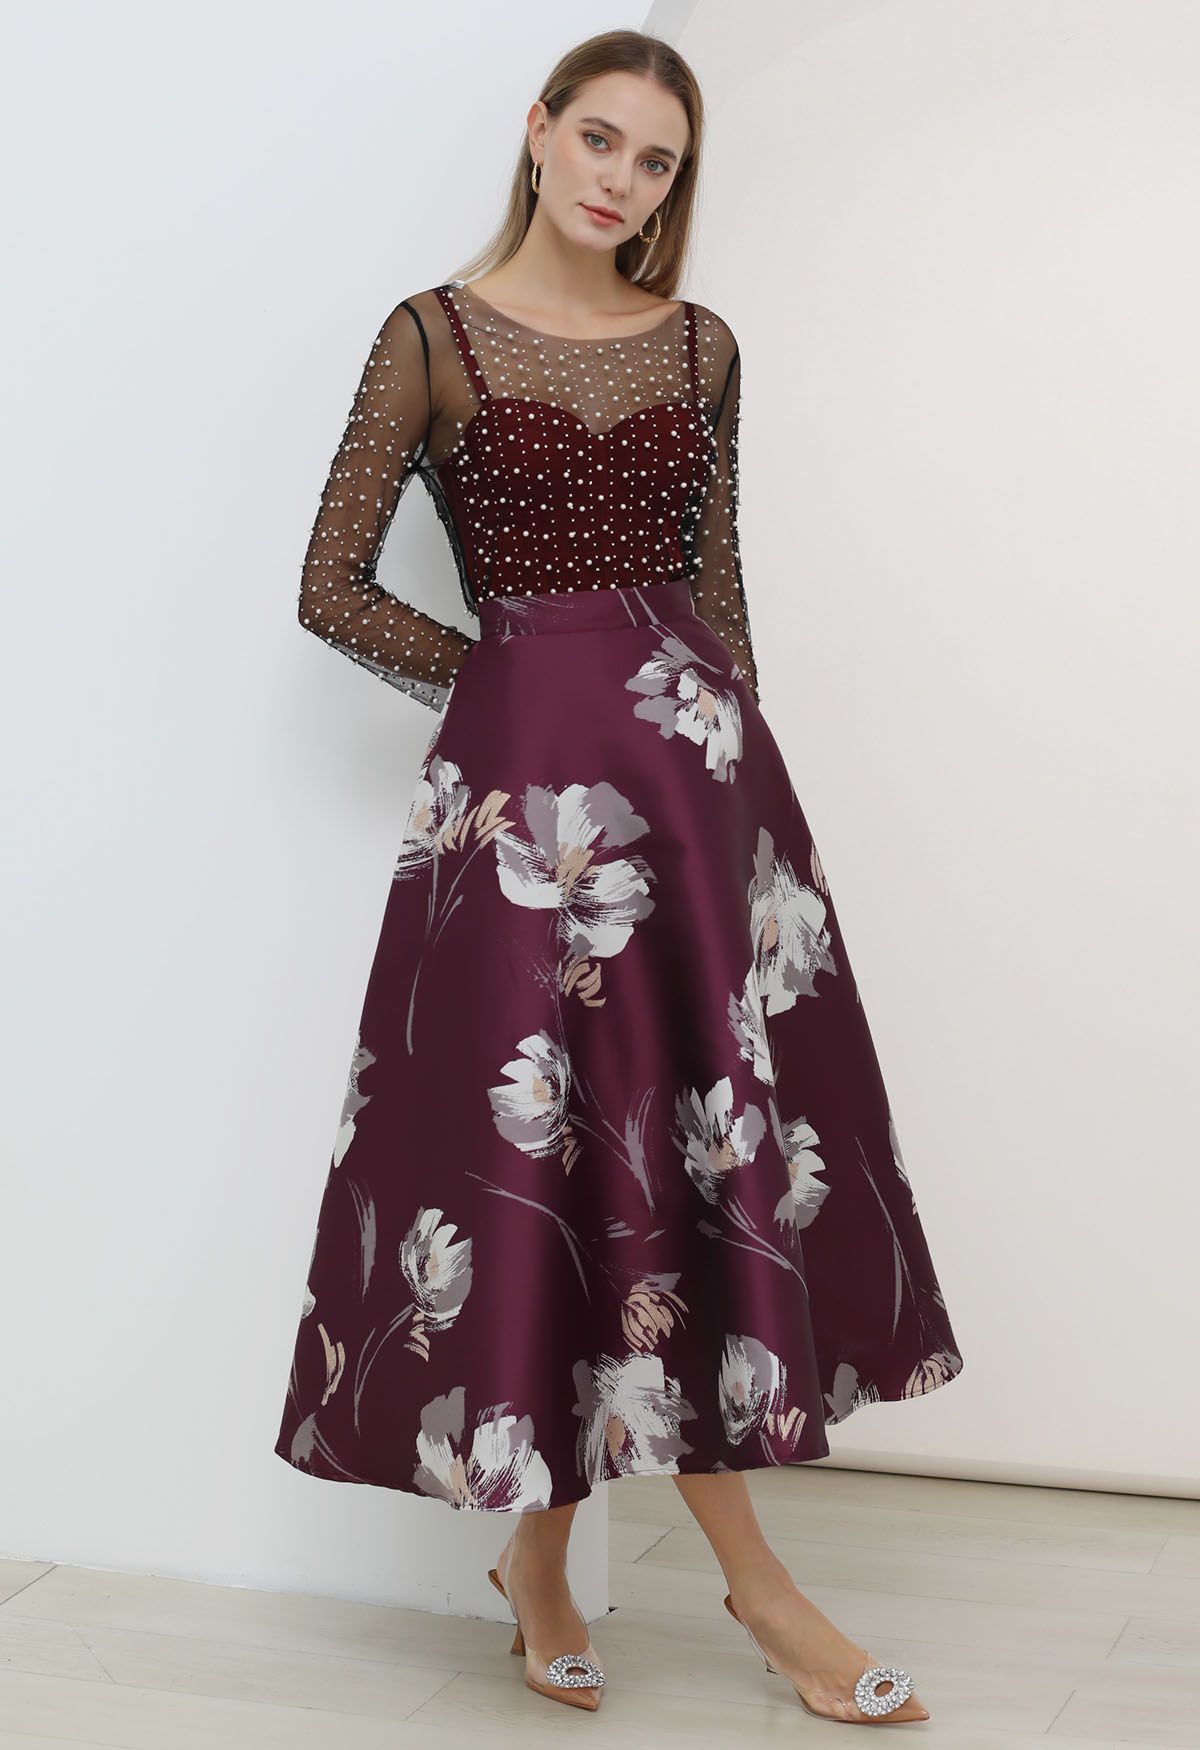 Blooming Floral Jacquard Maxi Skirt in Burgundy